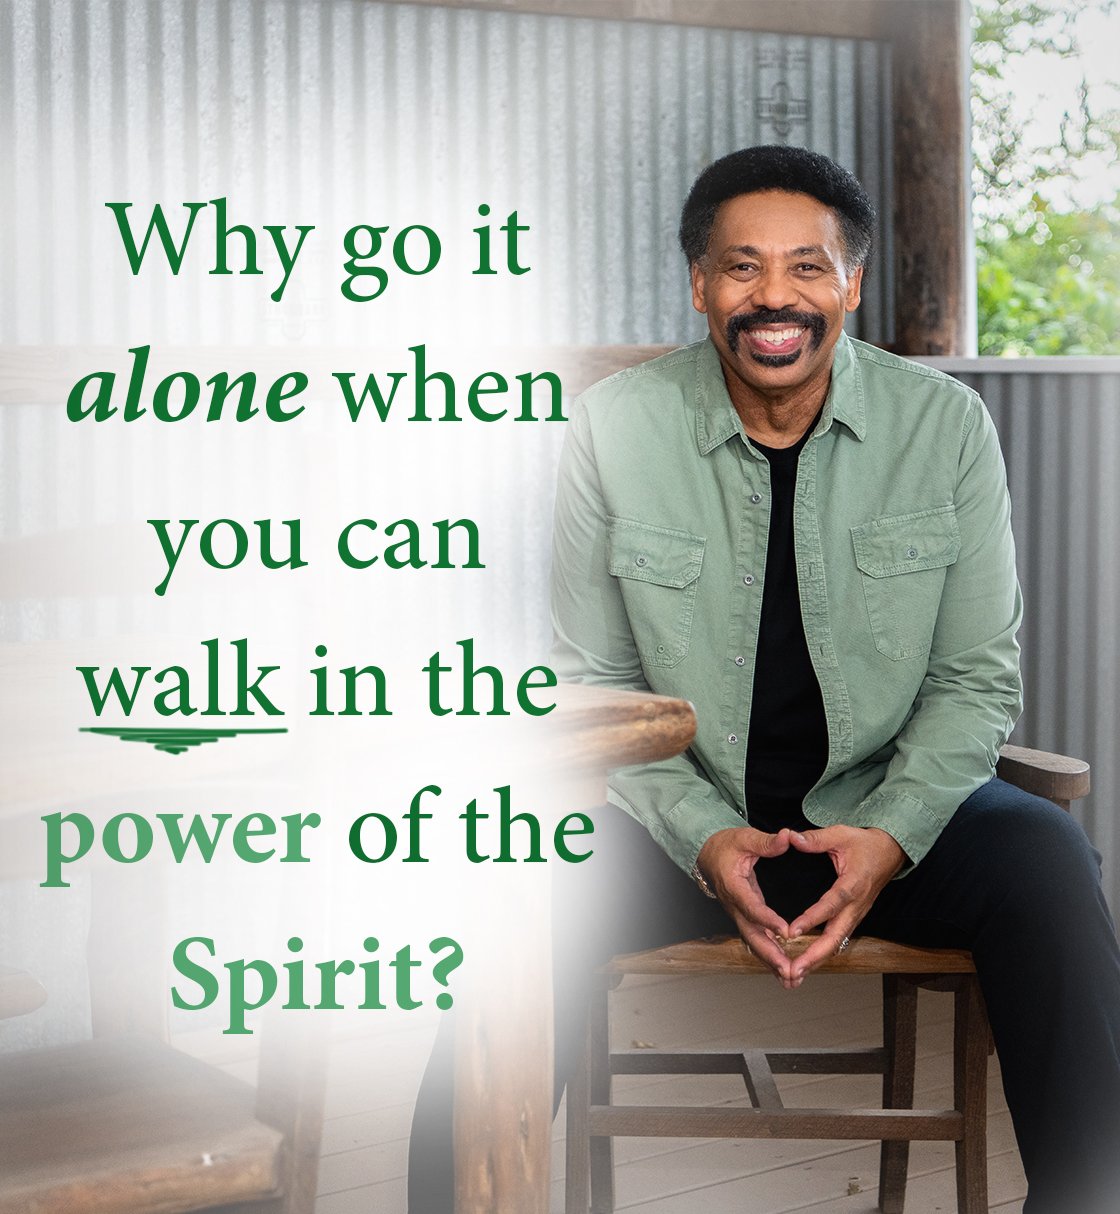 Why go it alone when you can walk in the power of the Spirit?